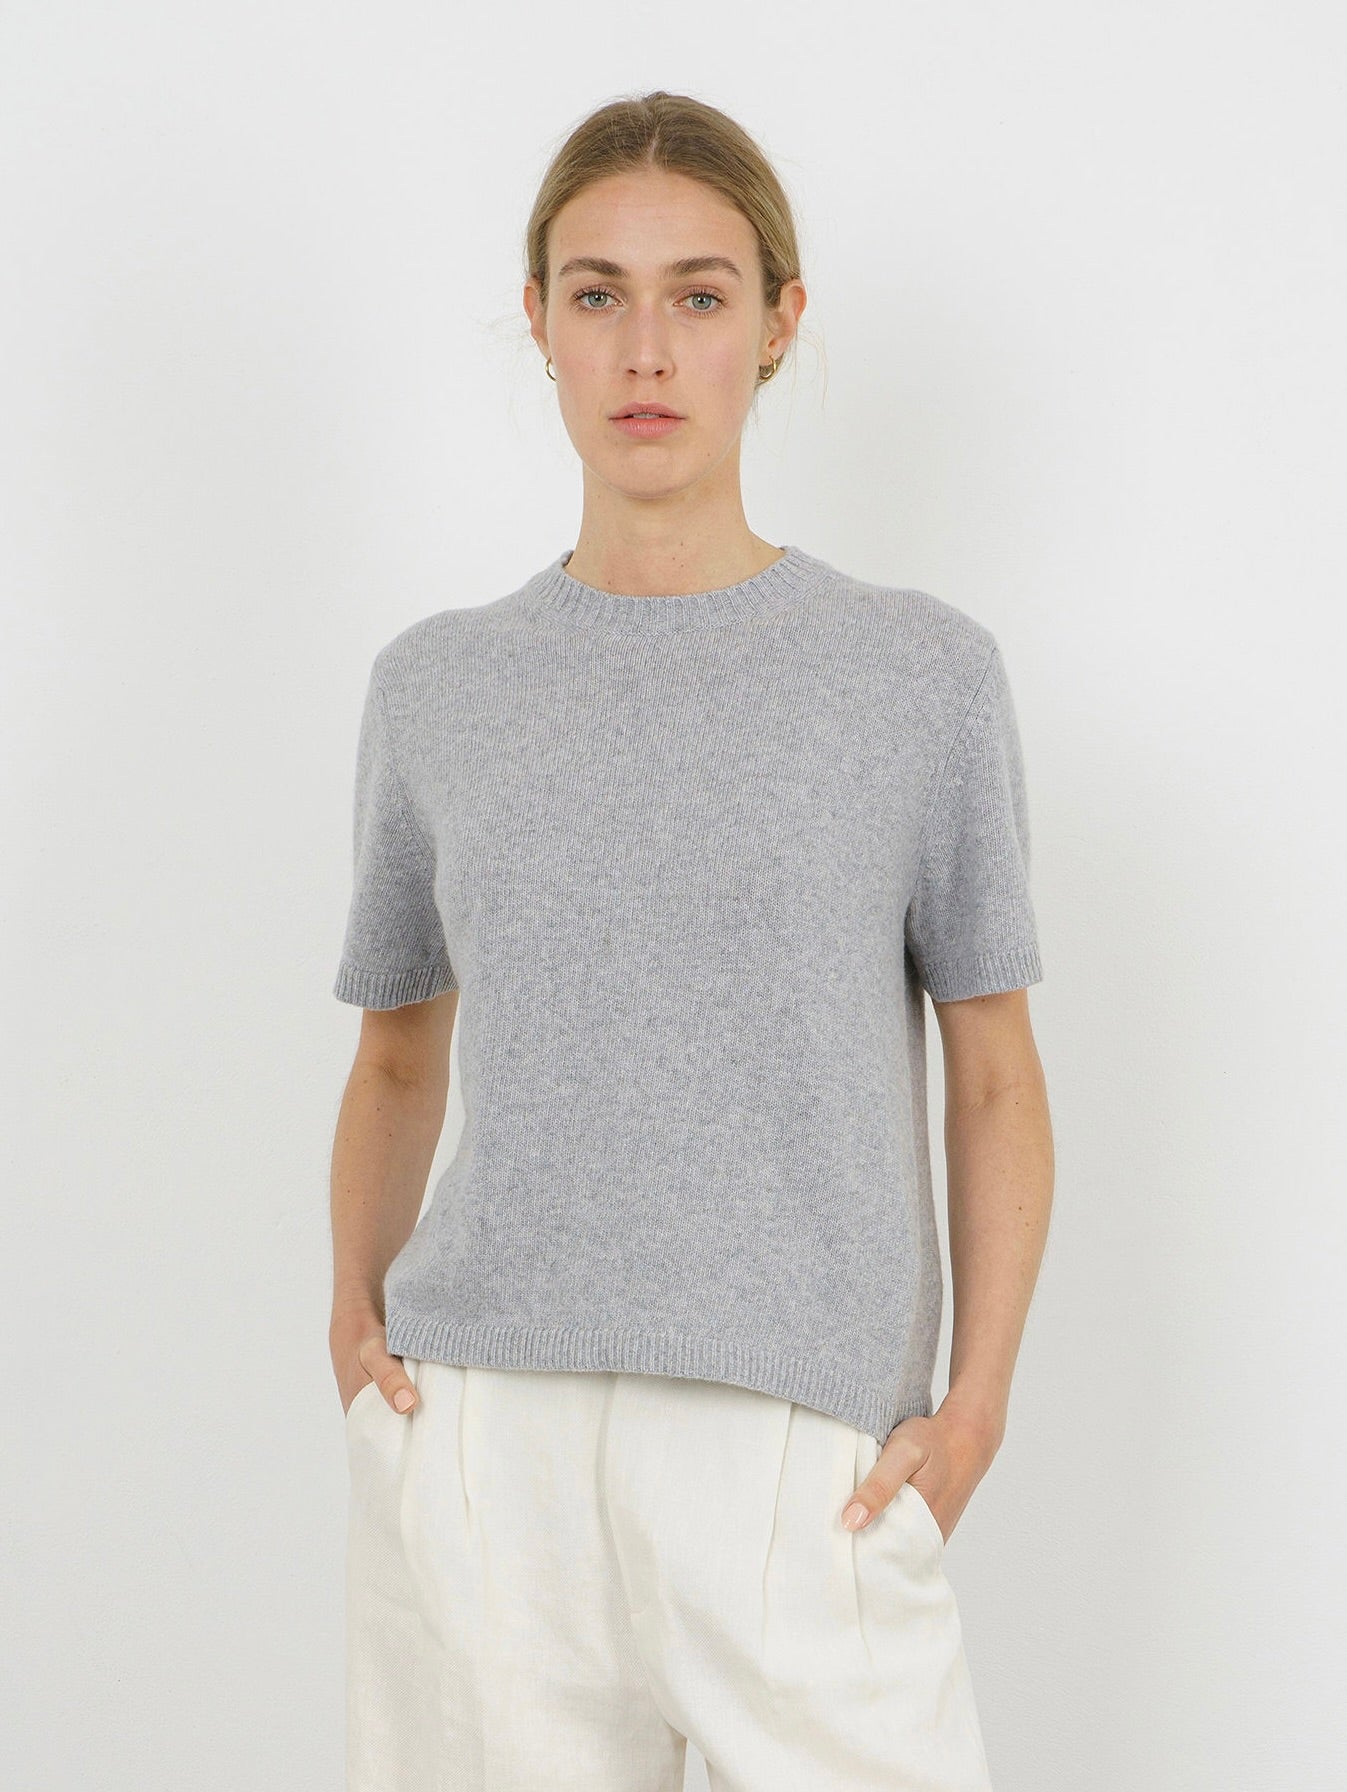 JULES SWEATER IN OYSTER GREY